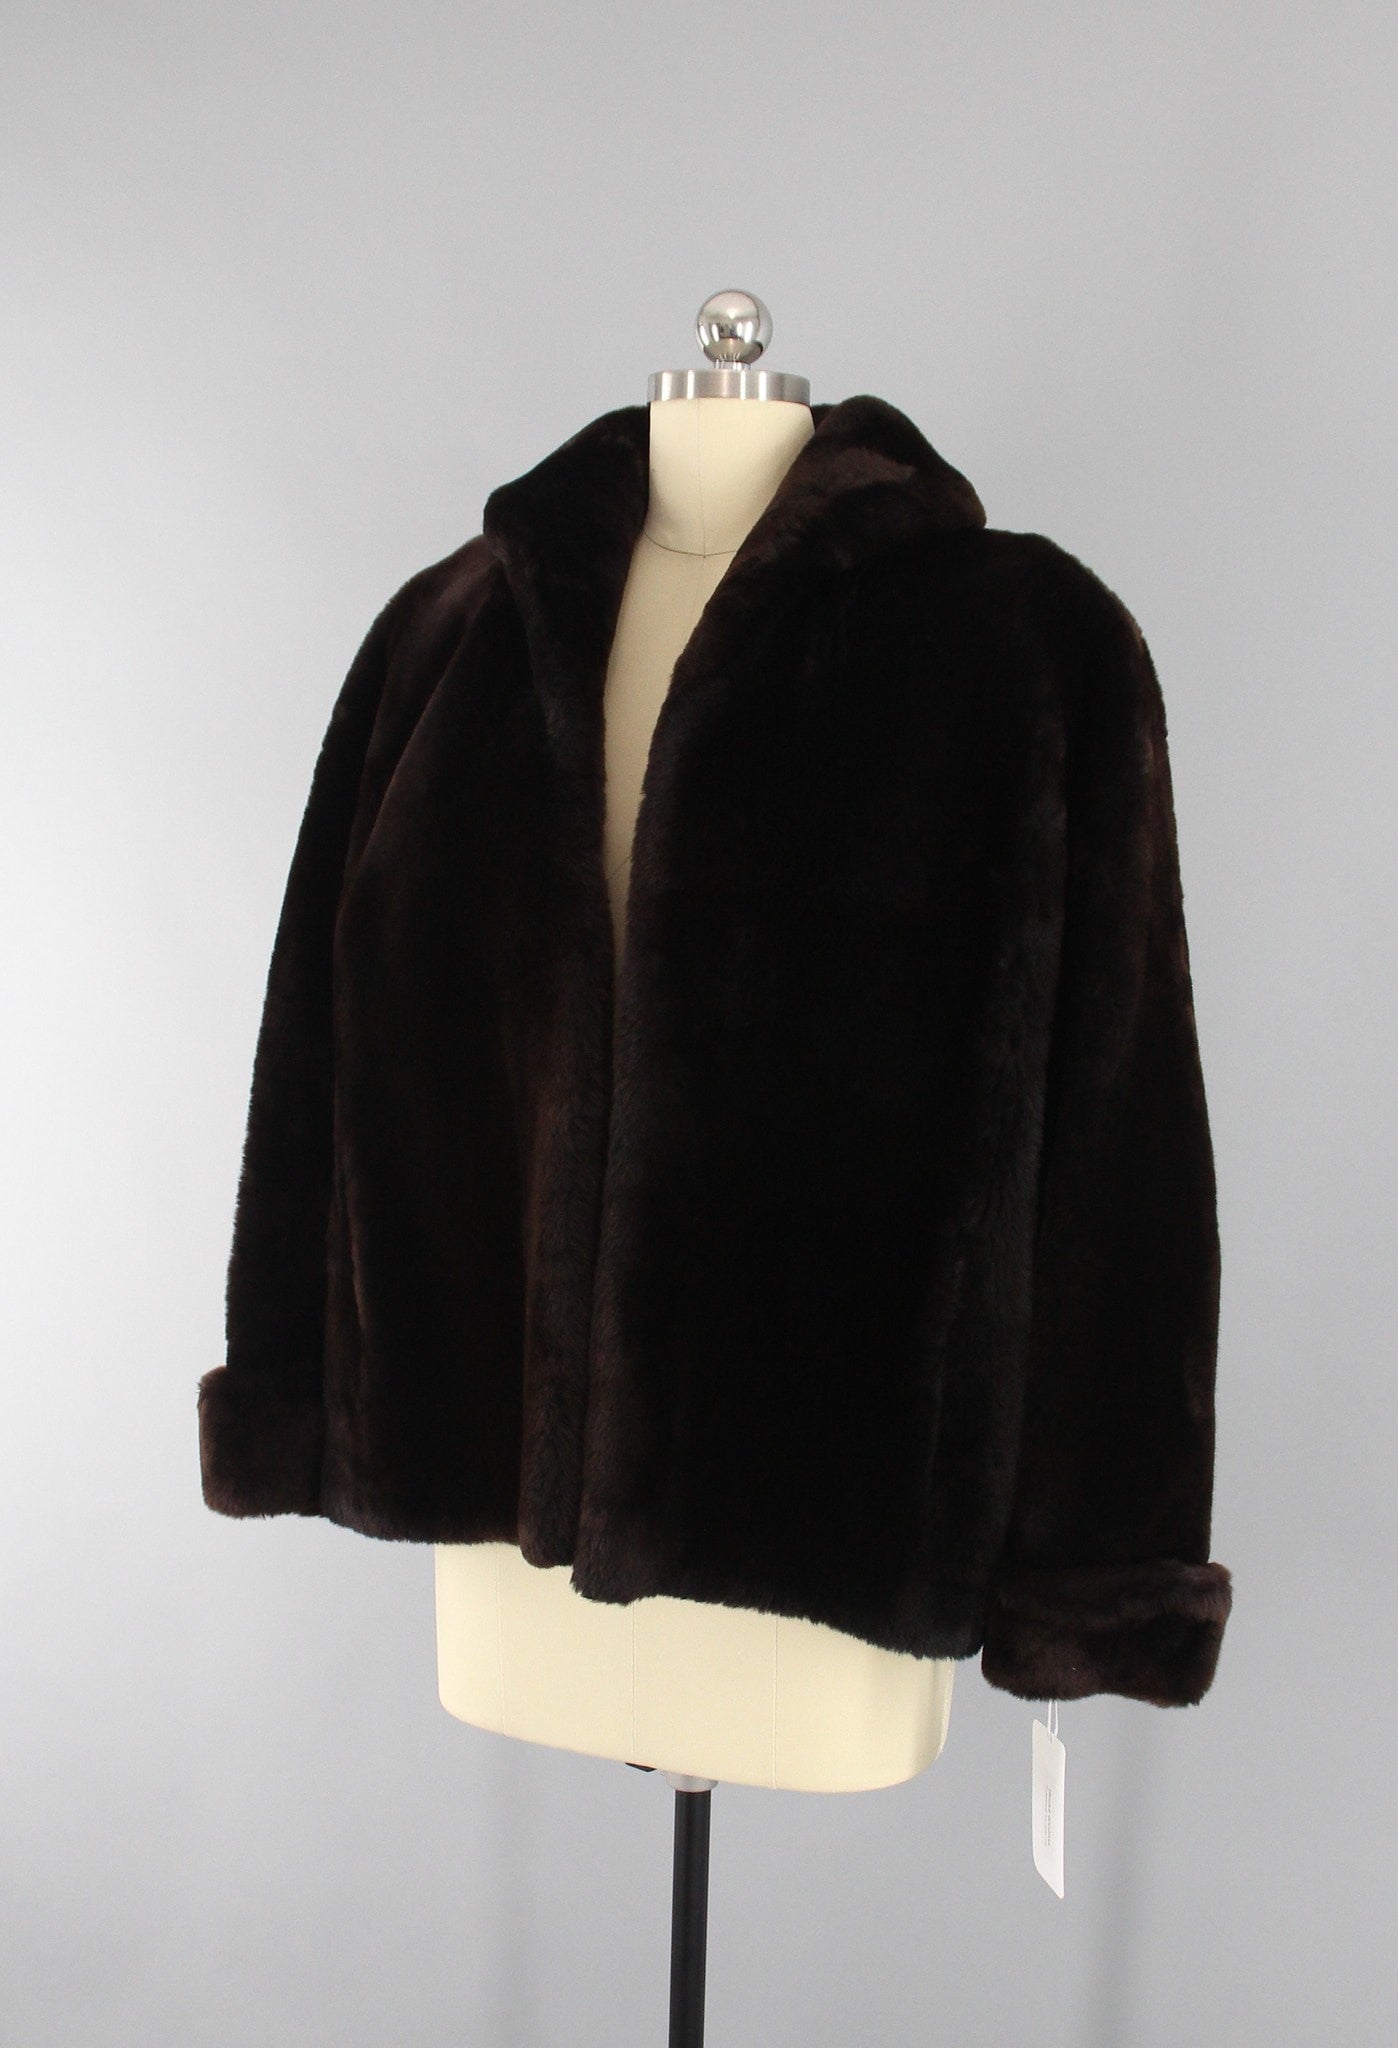 1950s Mouton Fur Coat in Chocolate Brown - ThisBlueBird